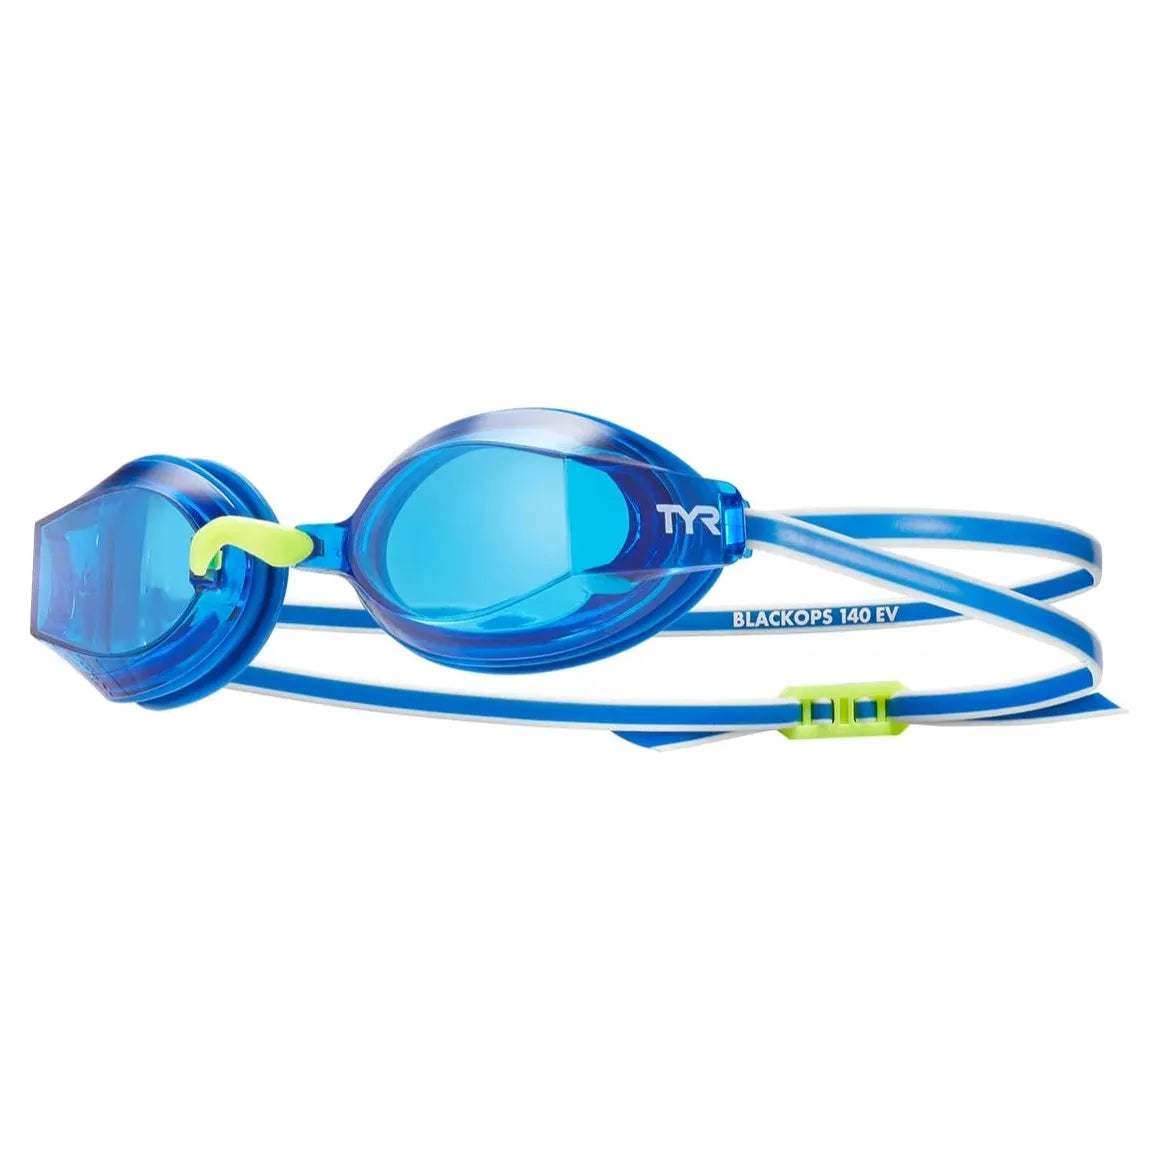 TYR Youth Black Ops 140 EV Racing Goggle